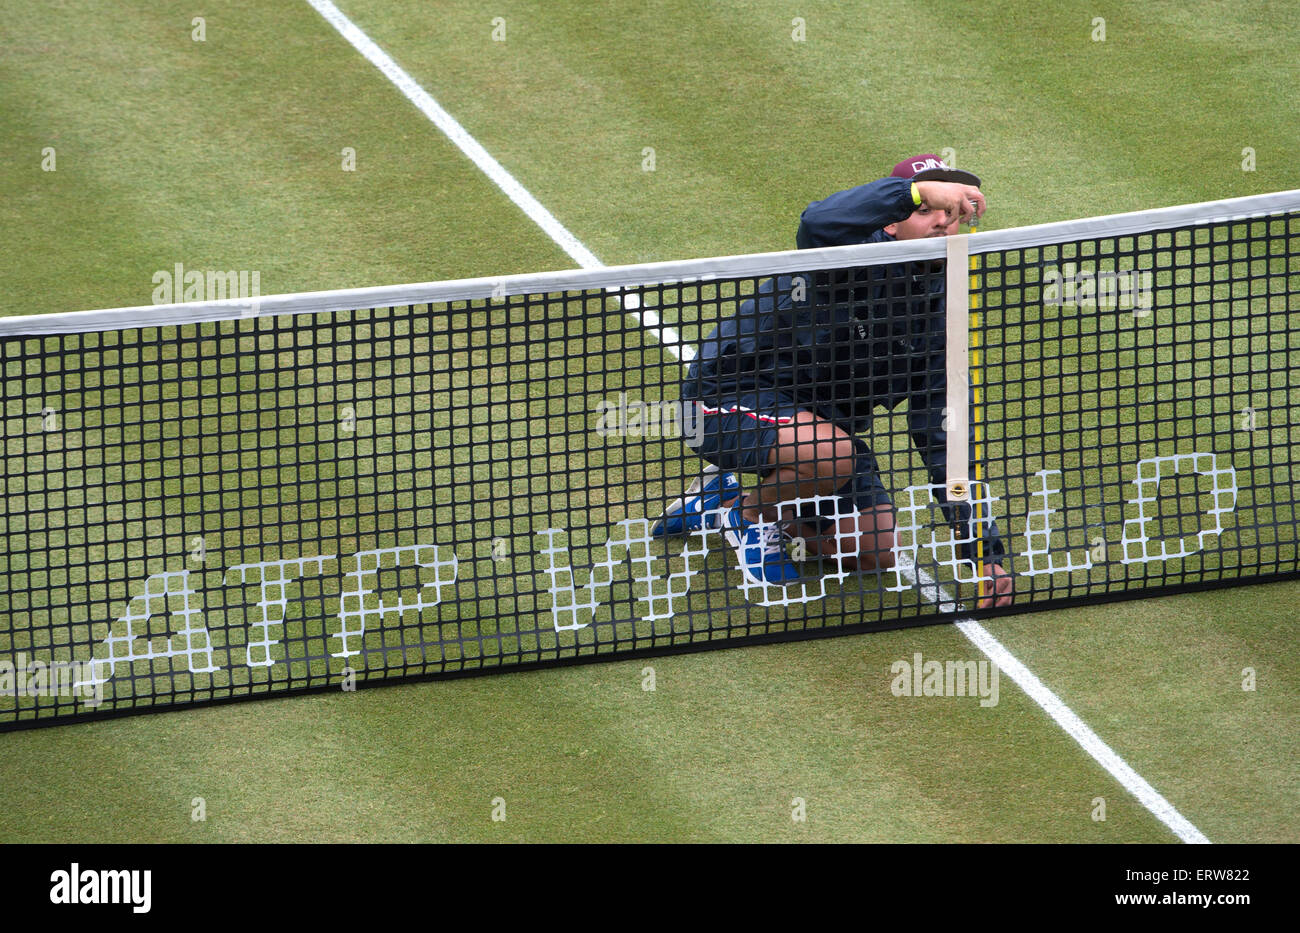 Stuttgart, Germany. 08th June, 2015. A man measures the height of the net during the ATP tournament in Stuttgart, Germany, 08 June 2015. Photo: MARIJAN MURAT/dpa/Alamy Live News Stock Photo